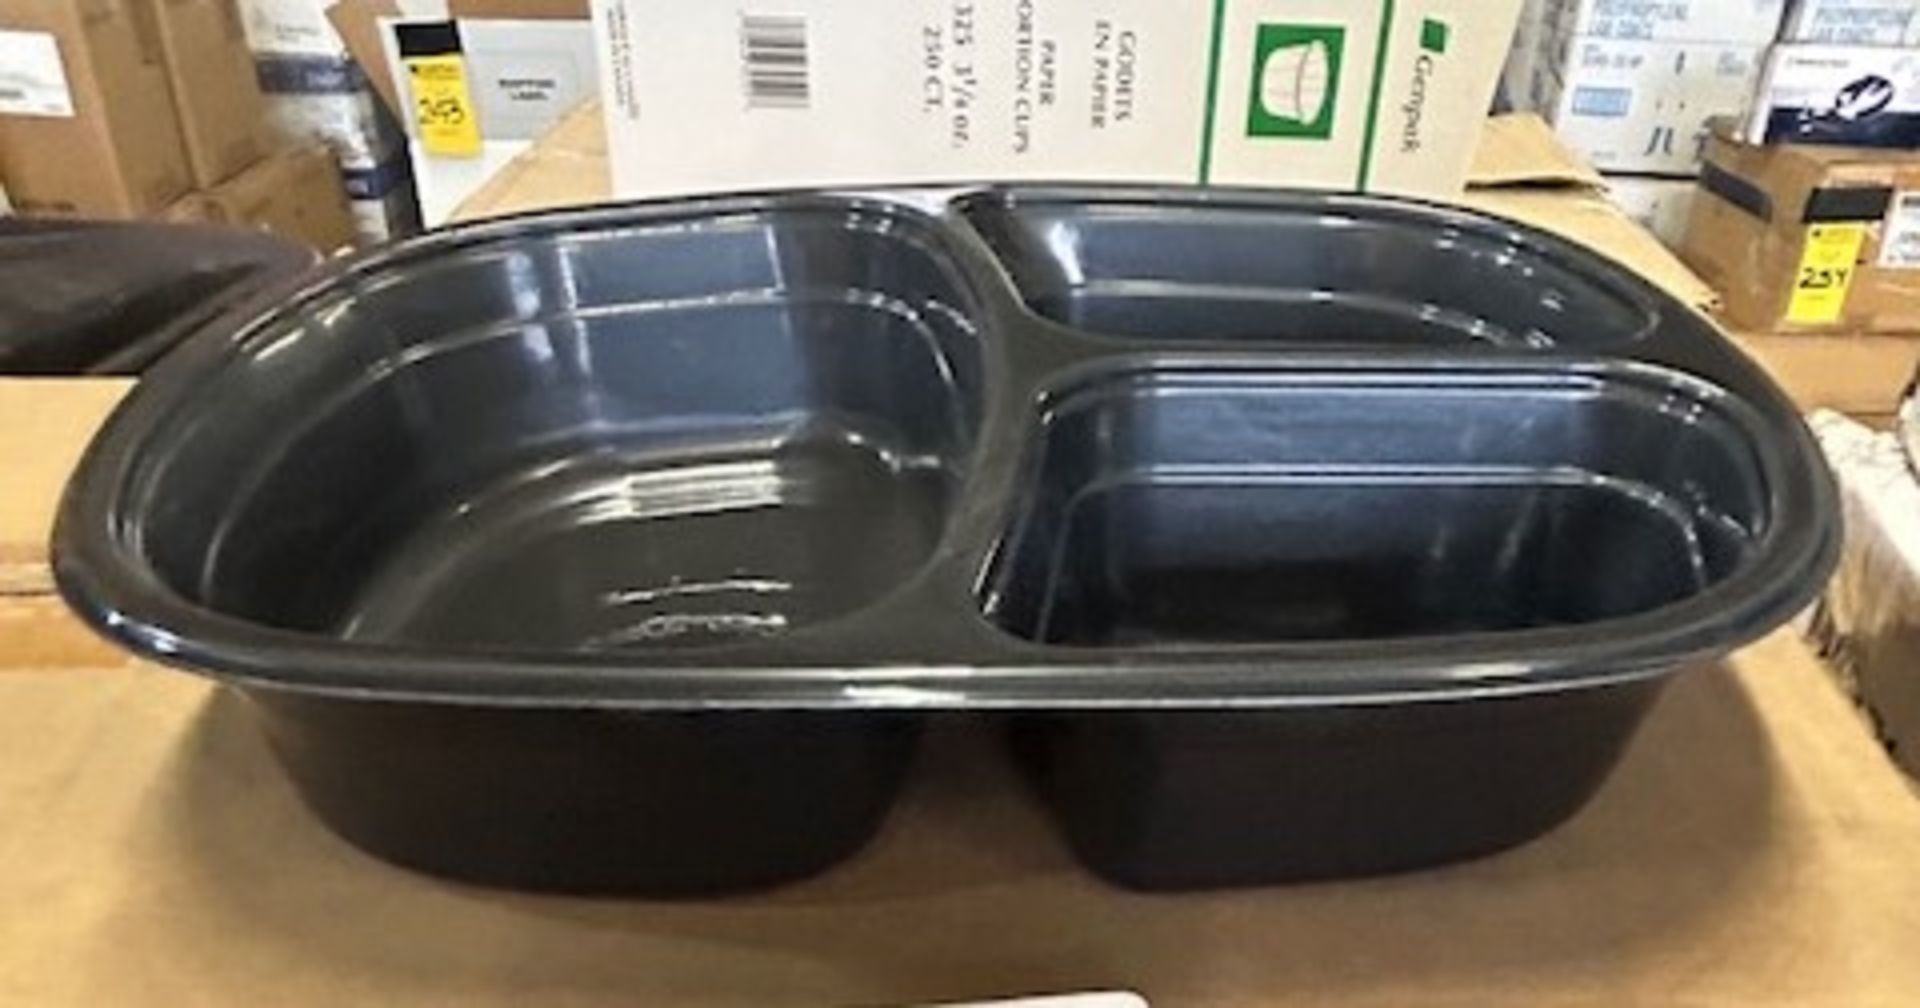 (5) Cases - Genpak #55027-8B Black Plastic 3-Compartment Tray (Pack 250) - Image 2 of 2